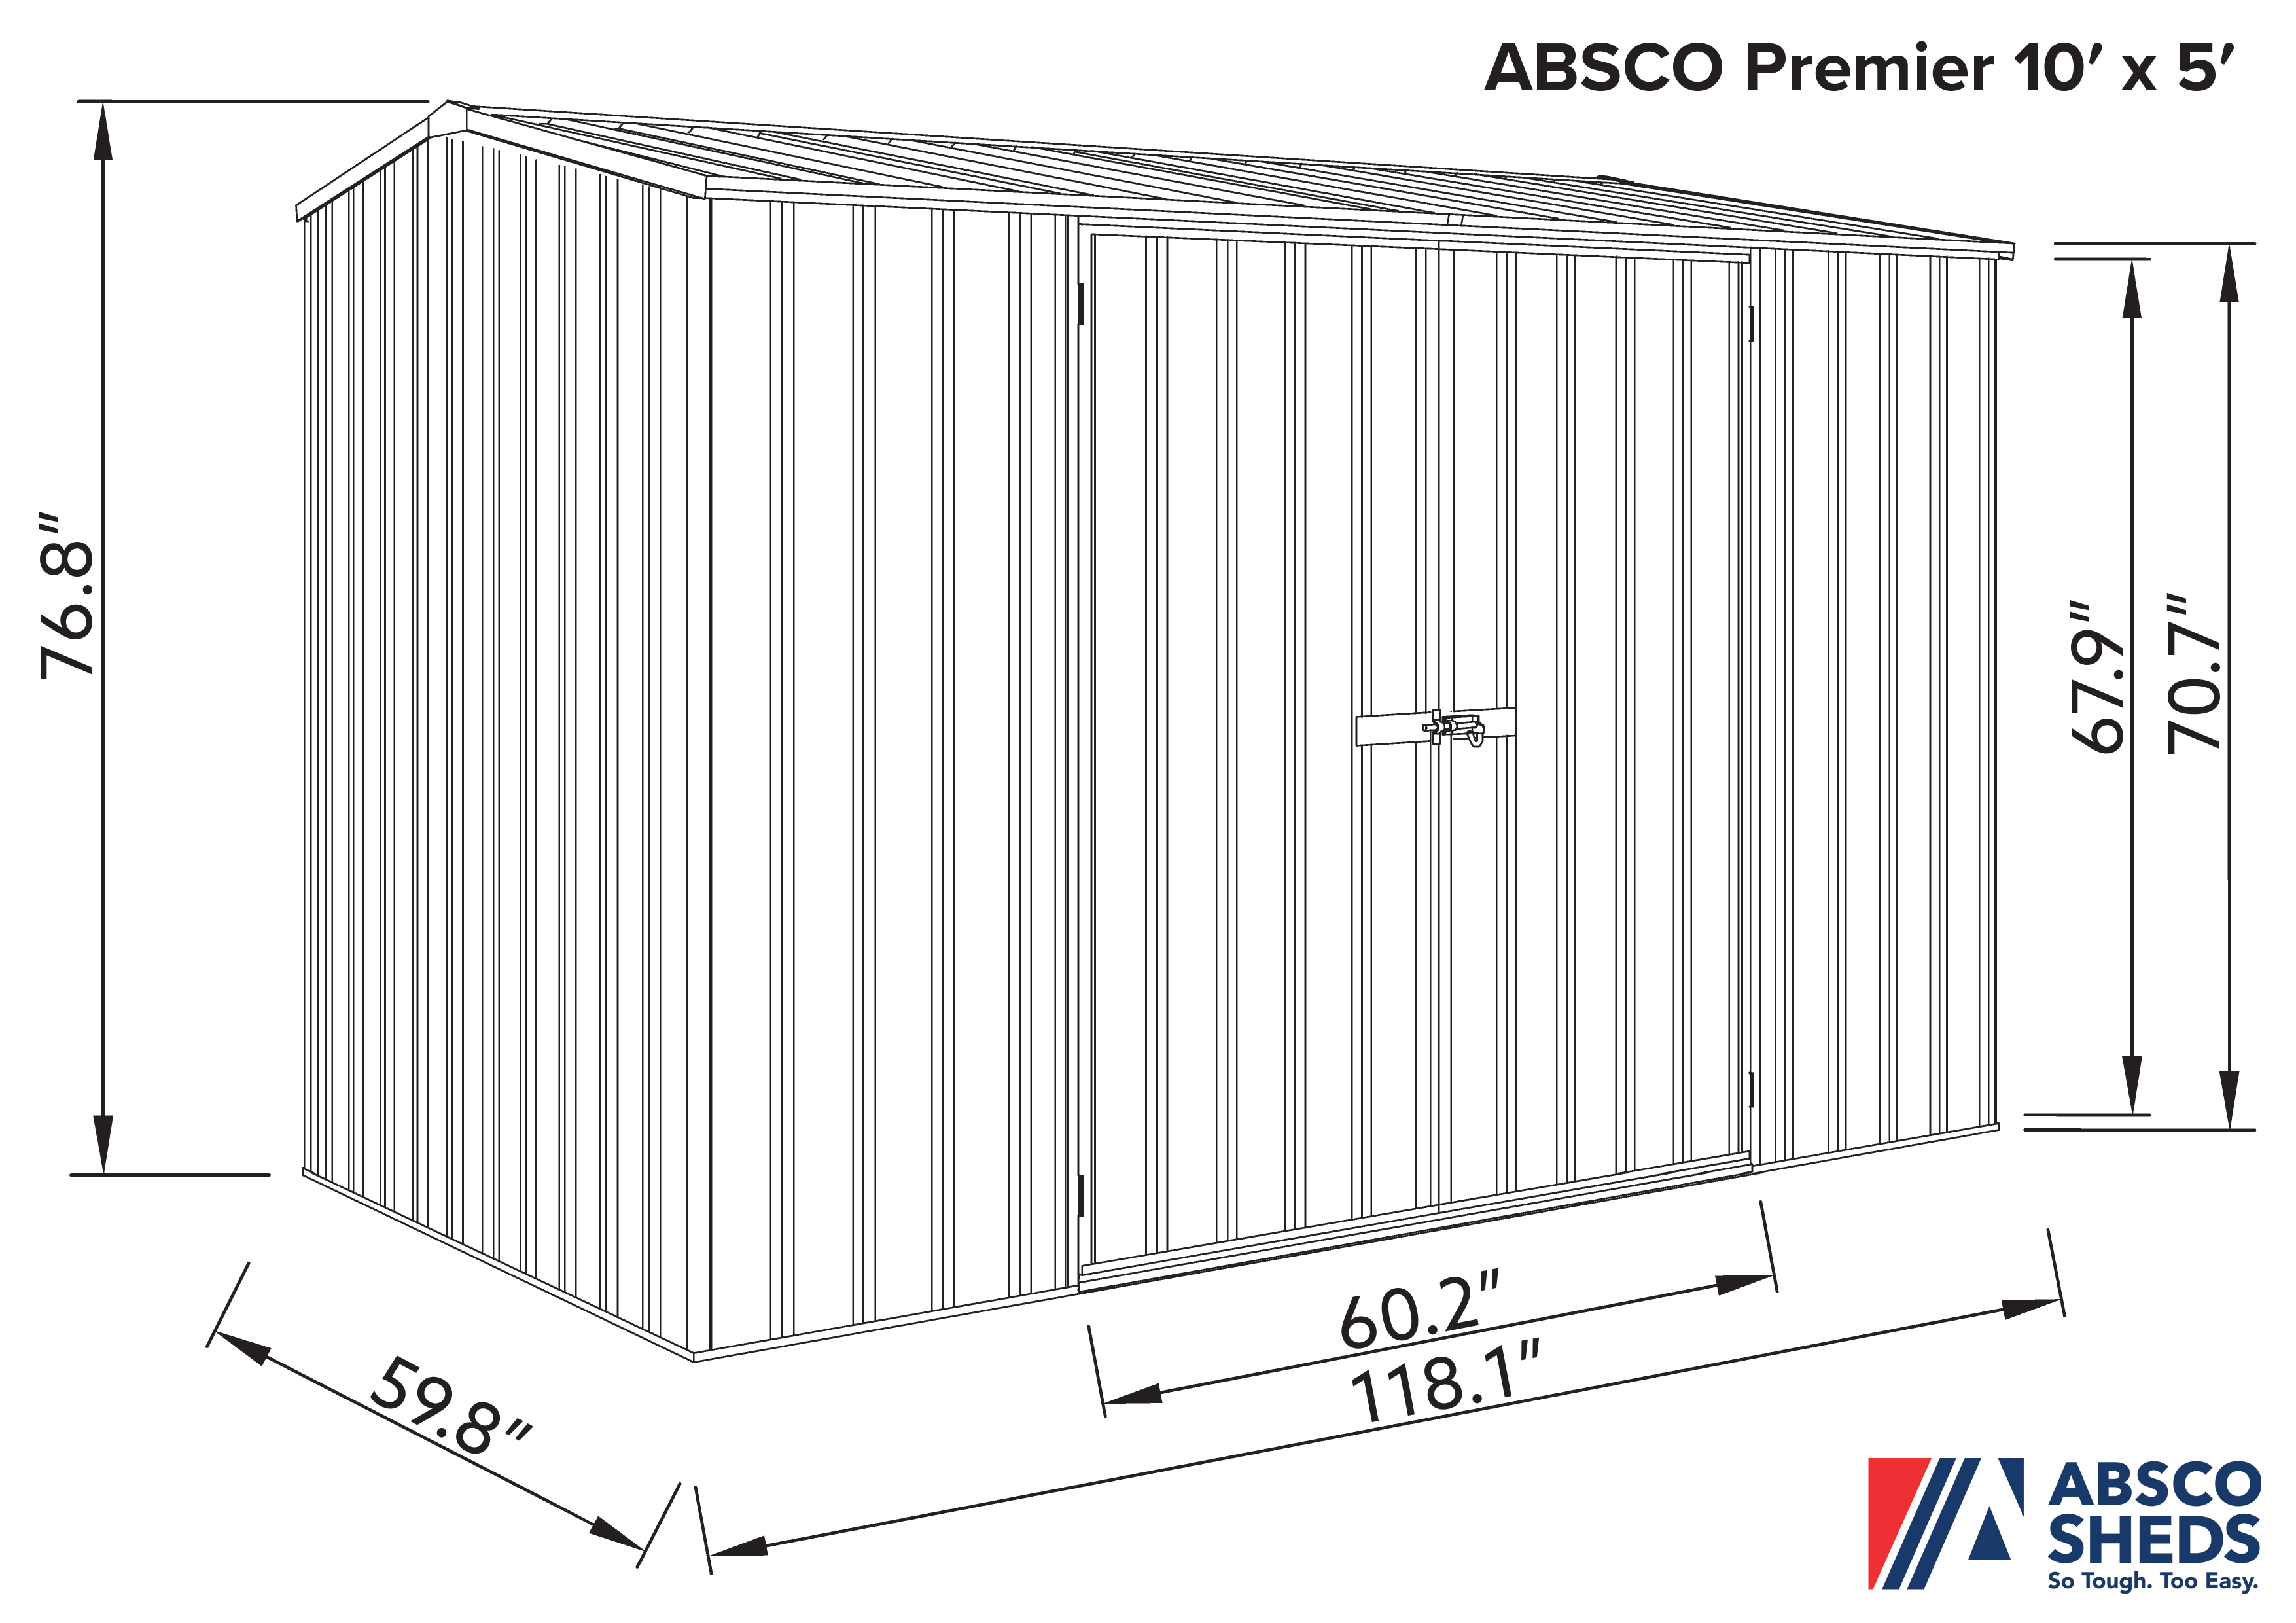 Absco Shed Premier 10 x 5 ft. Galvanized Steel and Metal Storage Shed, Gray - image 4 of 11